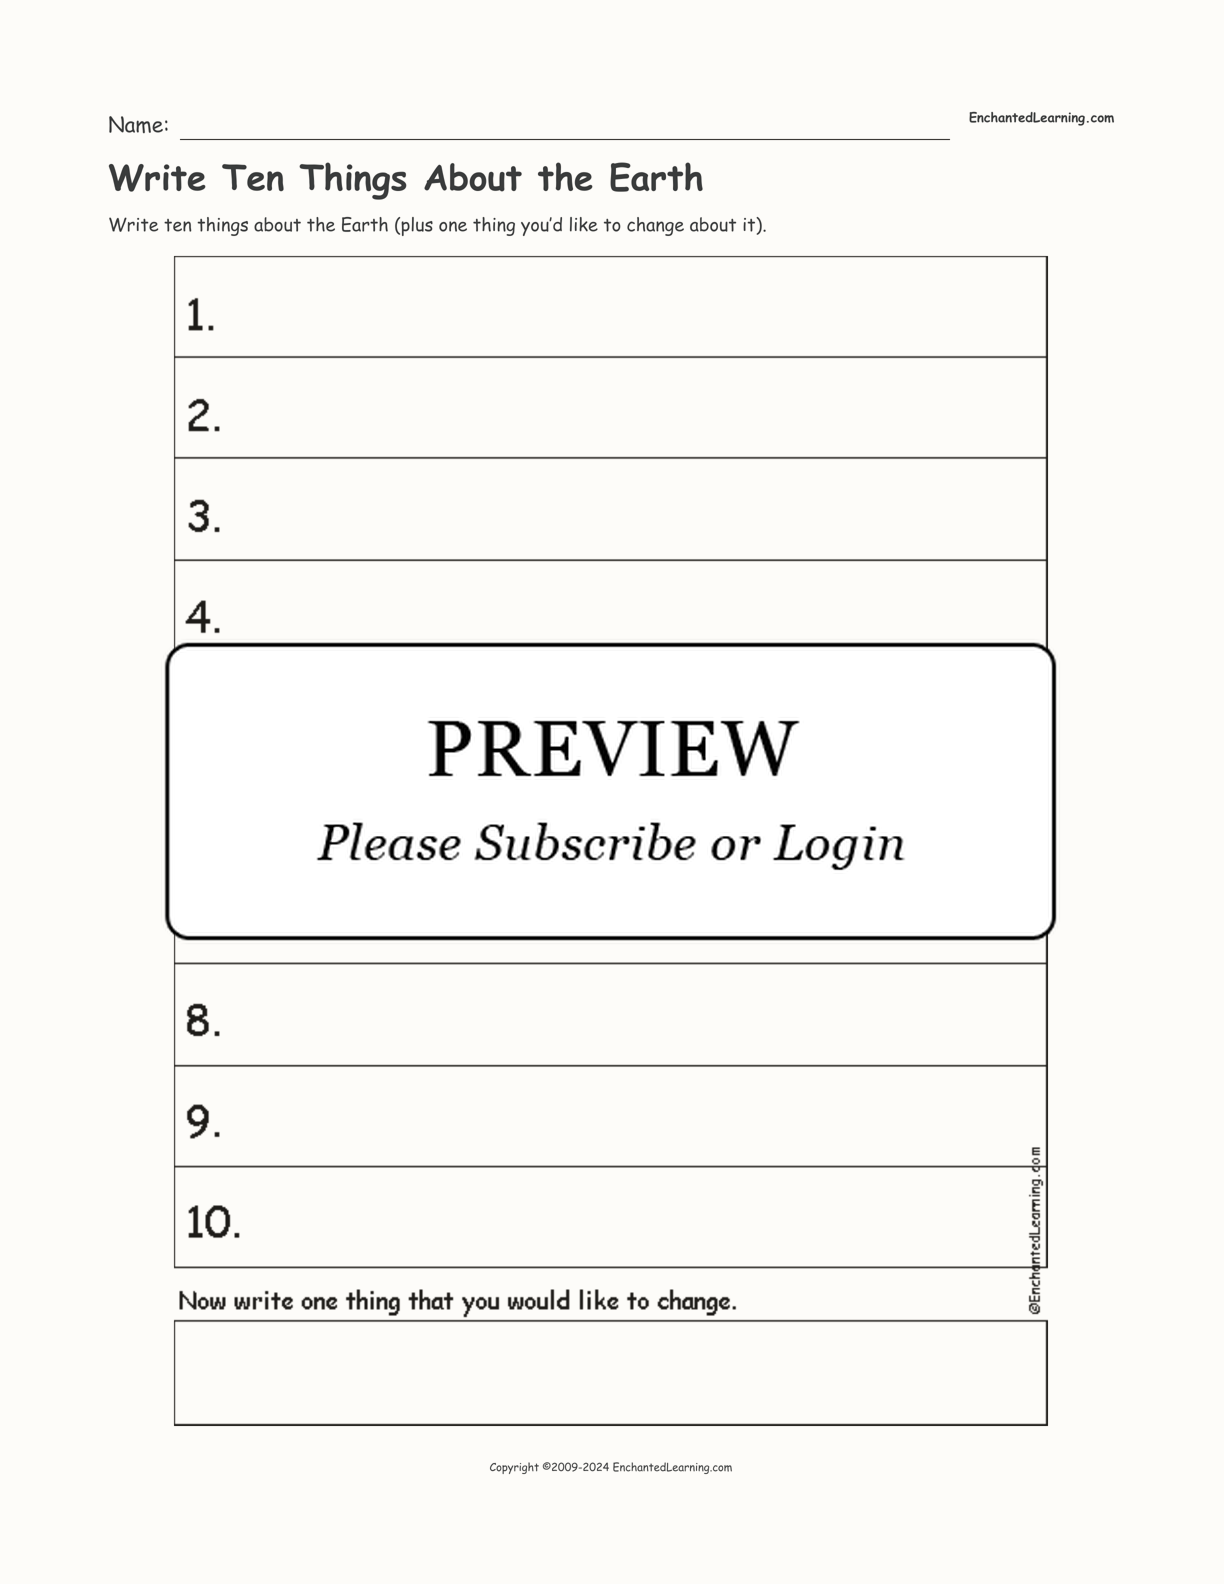 Write Ten Things About the Earth interactive worksheet page 1